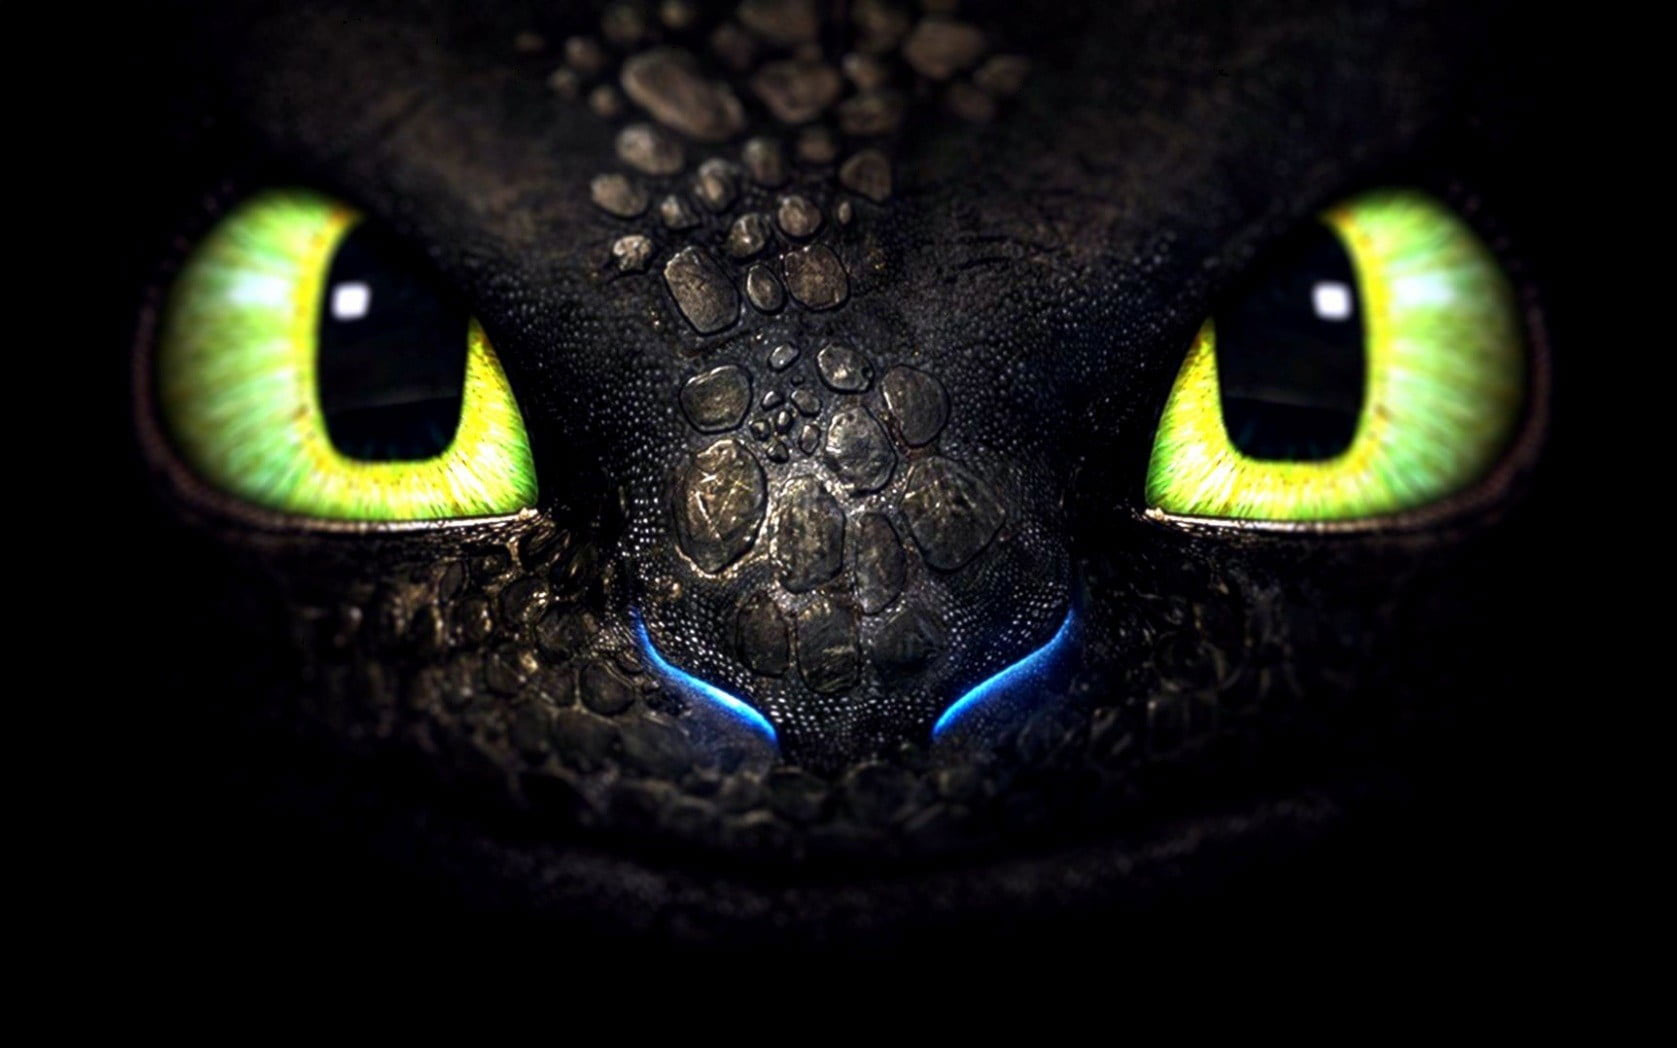 How to train your dragon Toothless digital wallpaper, animal themes